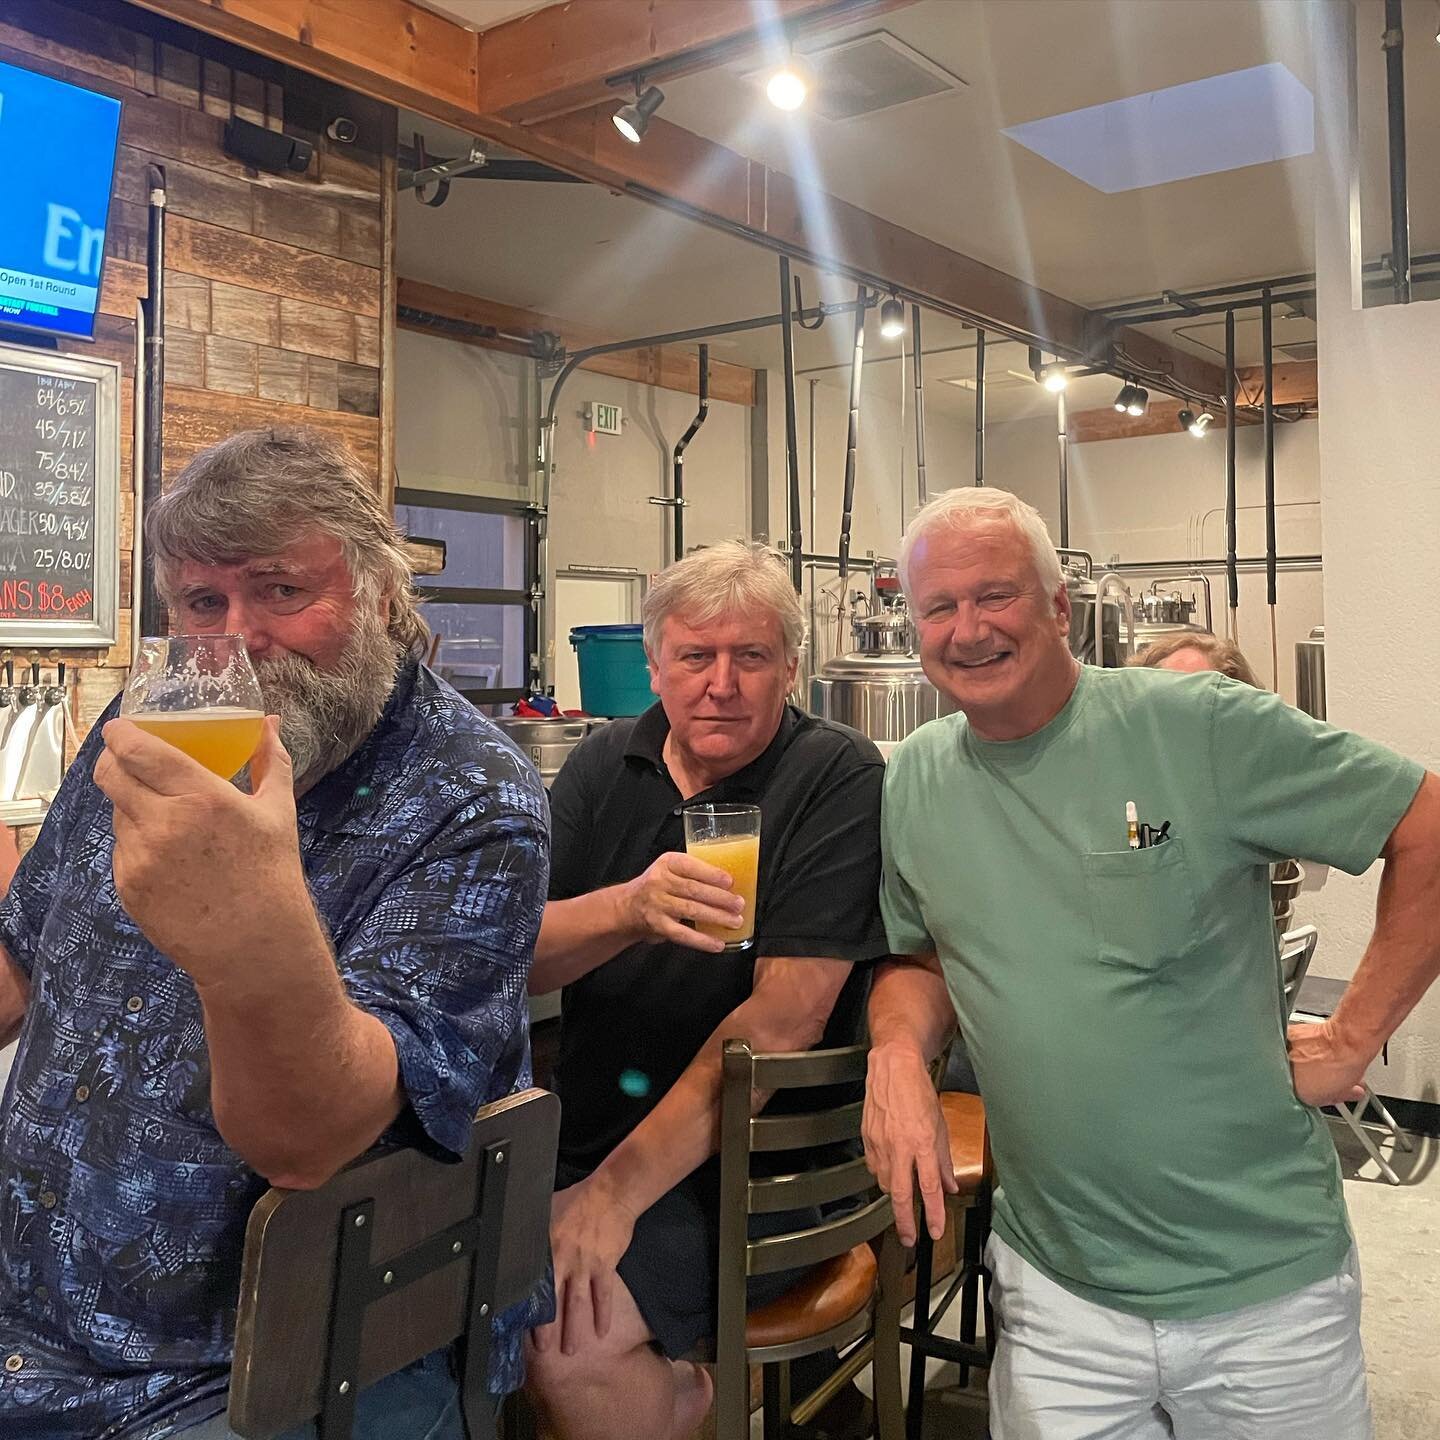 Congratulations to our winning trivia team tonight - Think Tanked! Join us next Thursday for another fun night of trivia!

#indianvalleybrewing #indianvalley #beer #brewery #craftbeer #novato #marin #marincounty #trivia #pubtrivia #taproom